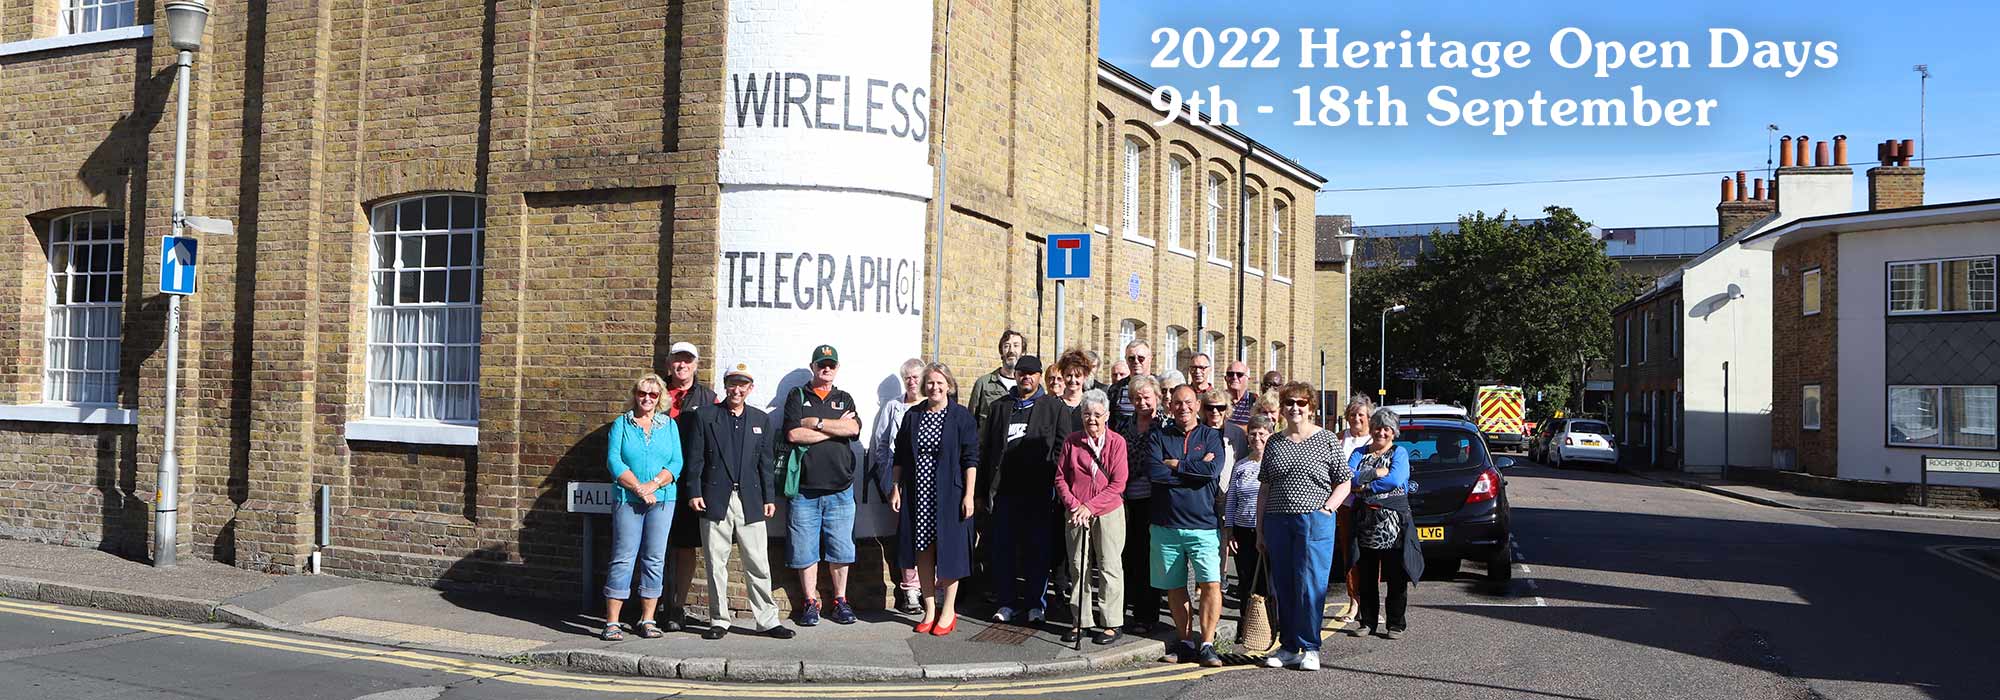 Chelmsford Heritage Open Days 2022